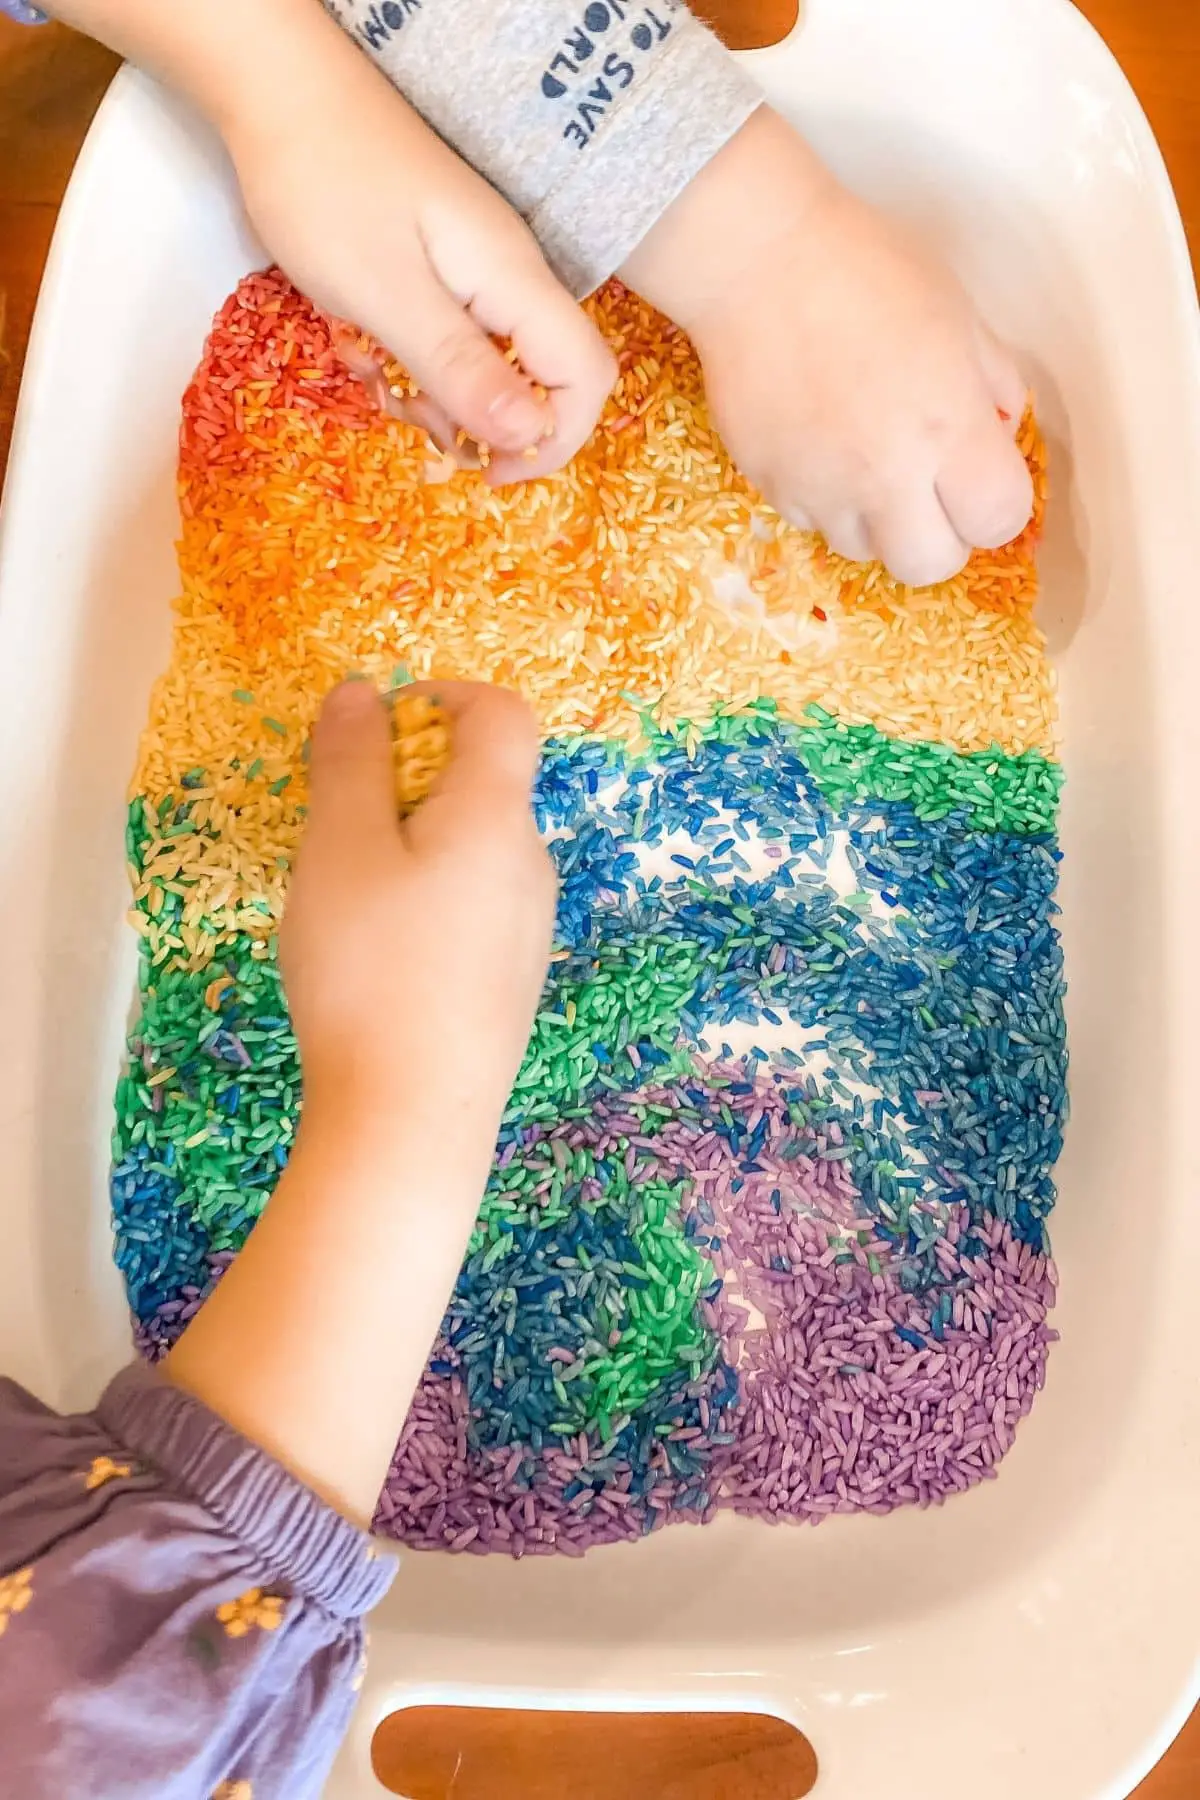 19 Amazing Sensory Play Benefits (and Why It’s Important)